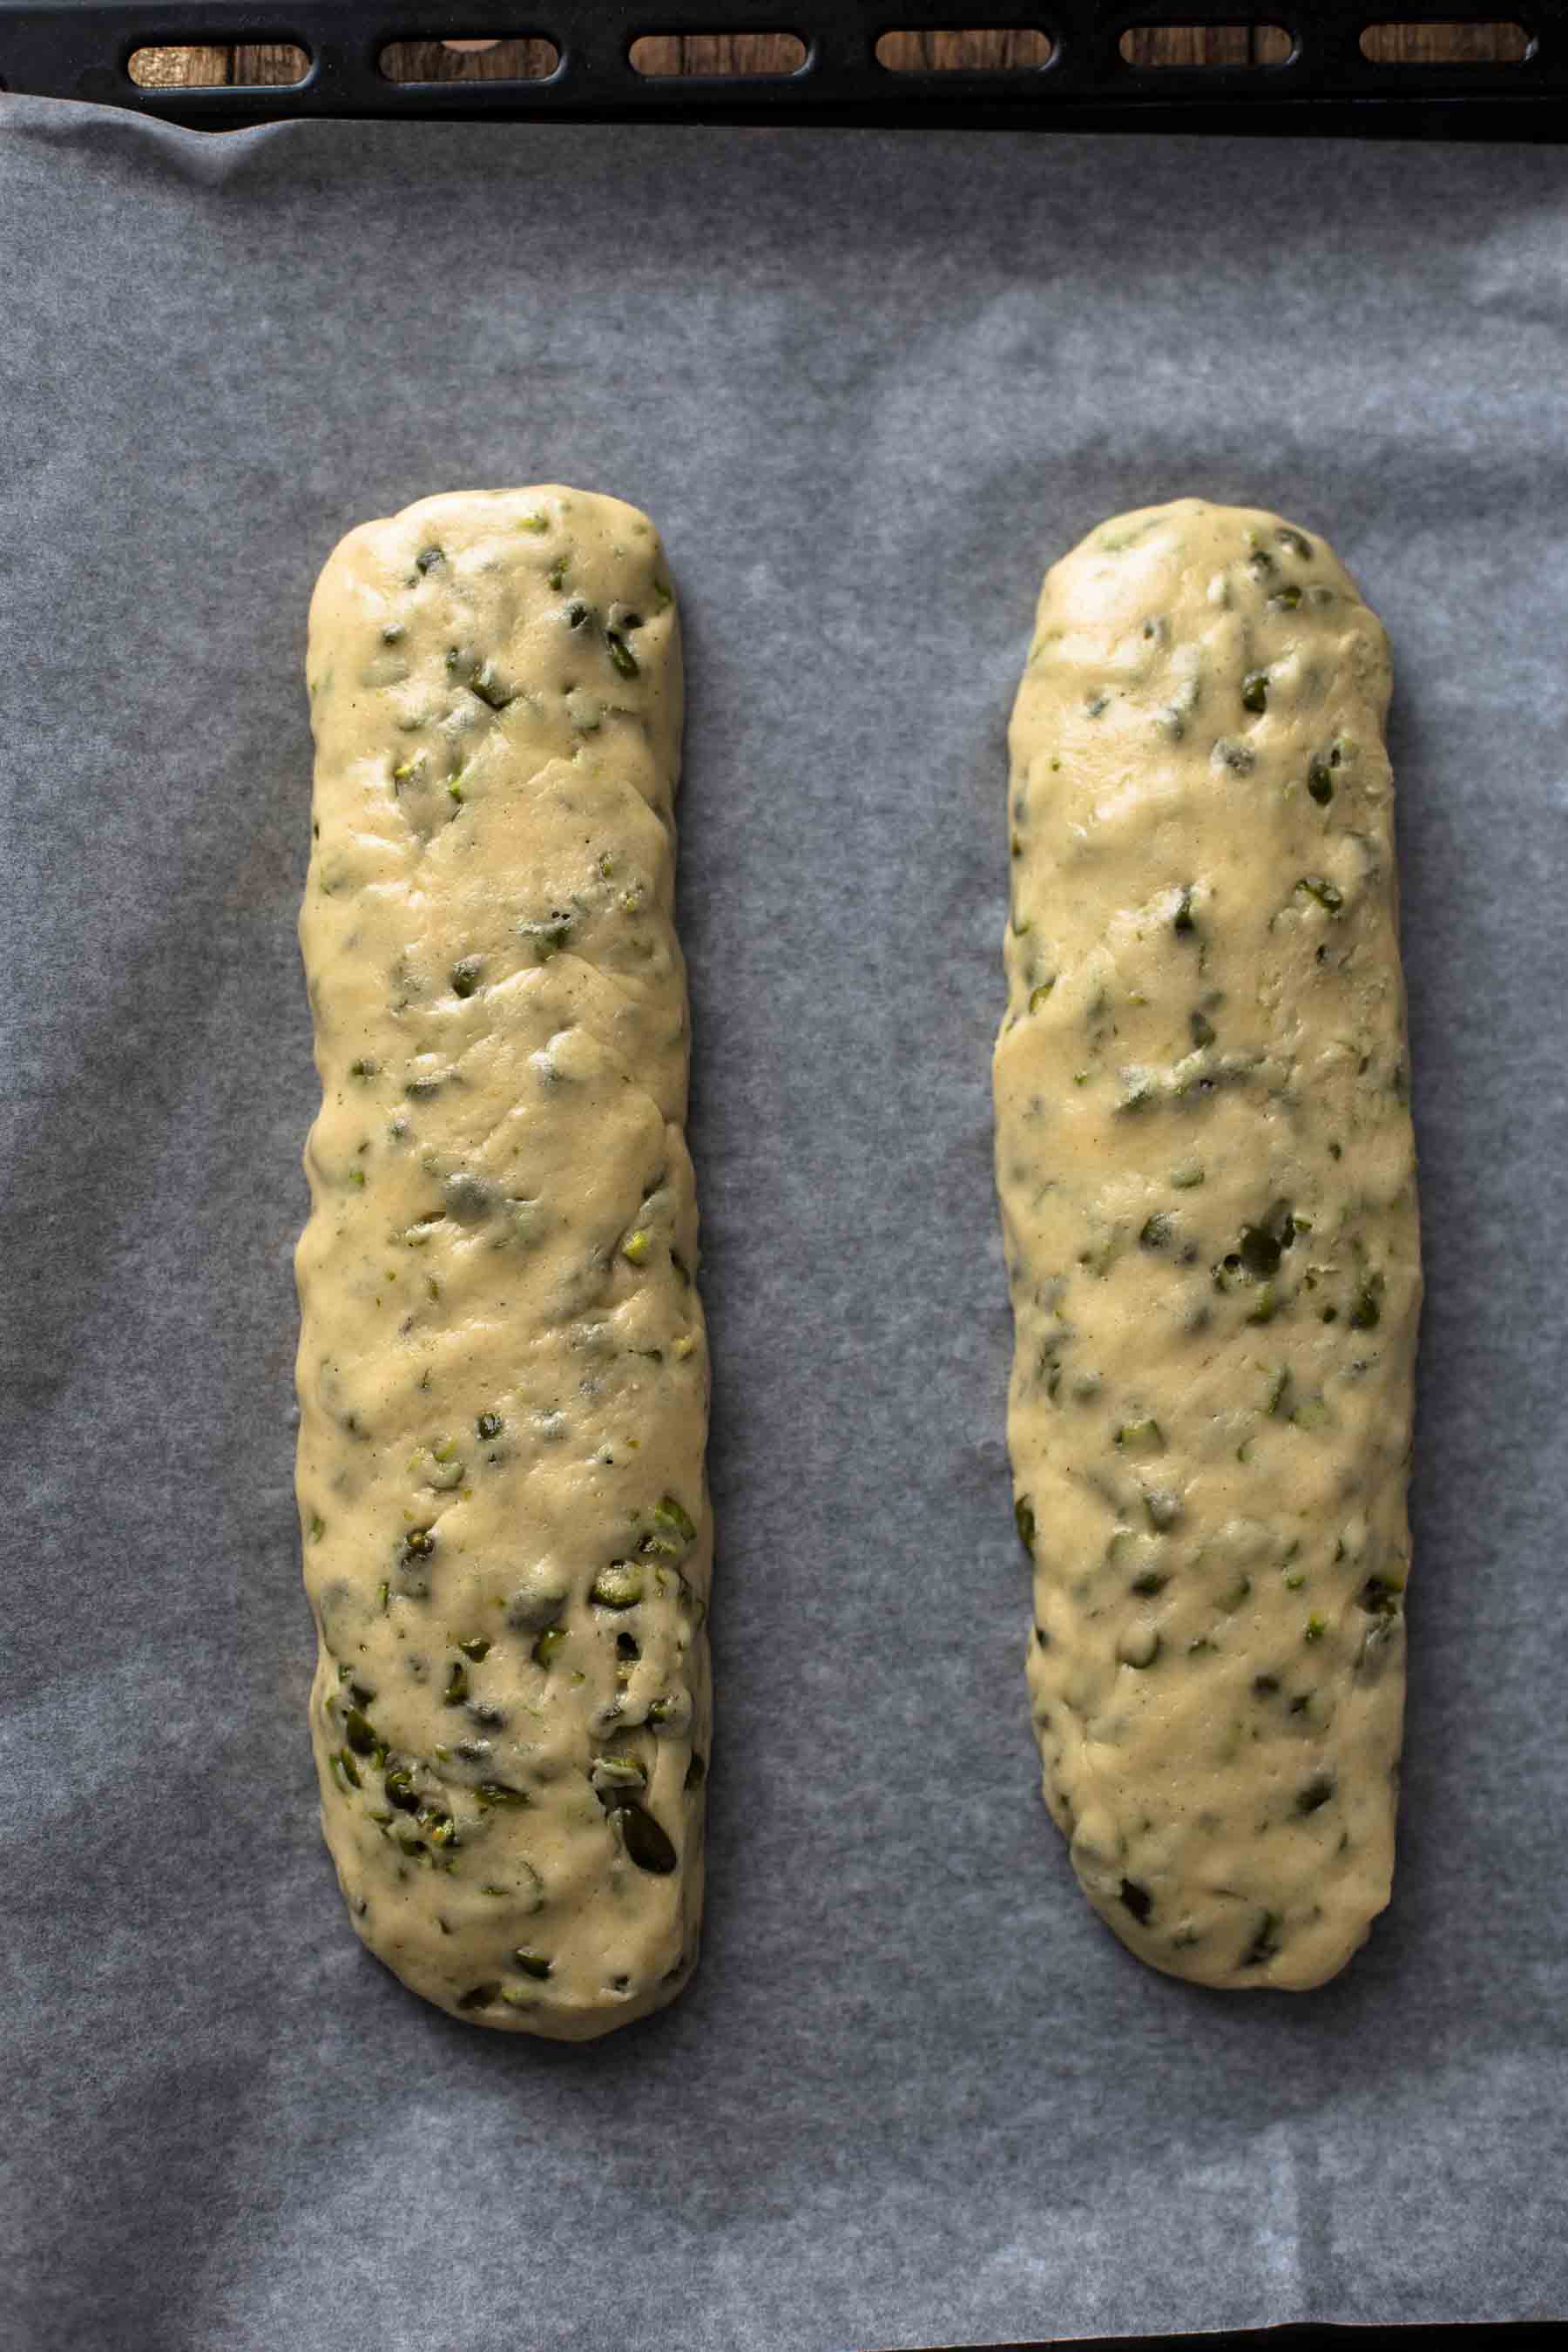 two logs of shaped cookie dough on a baking sheet